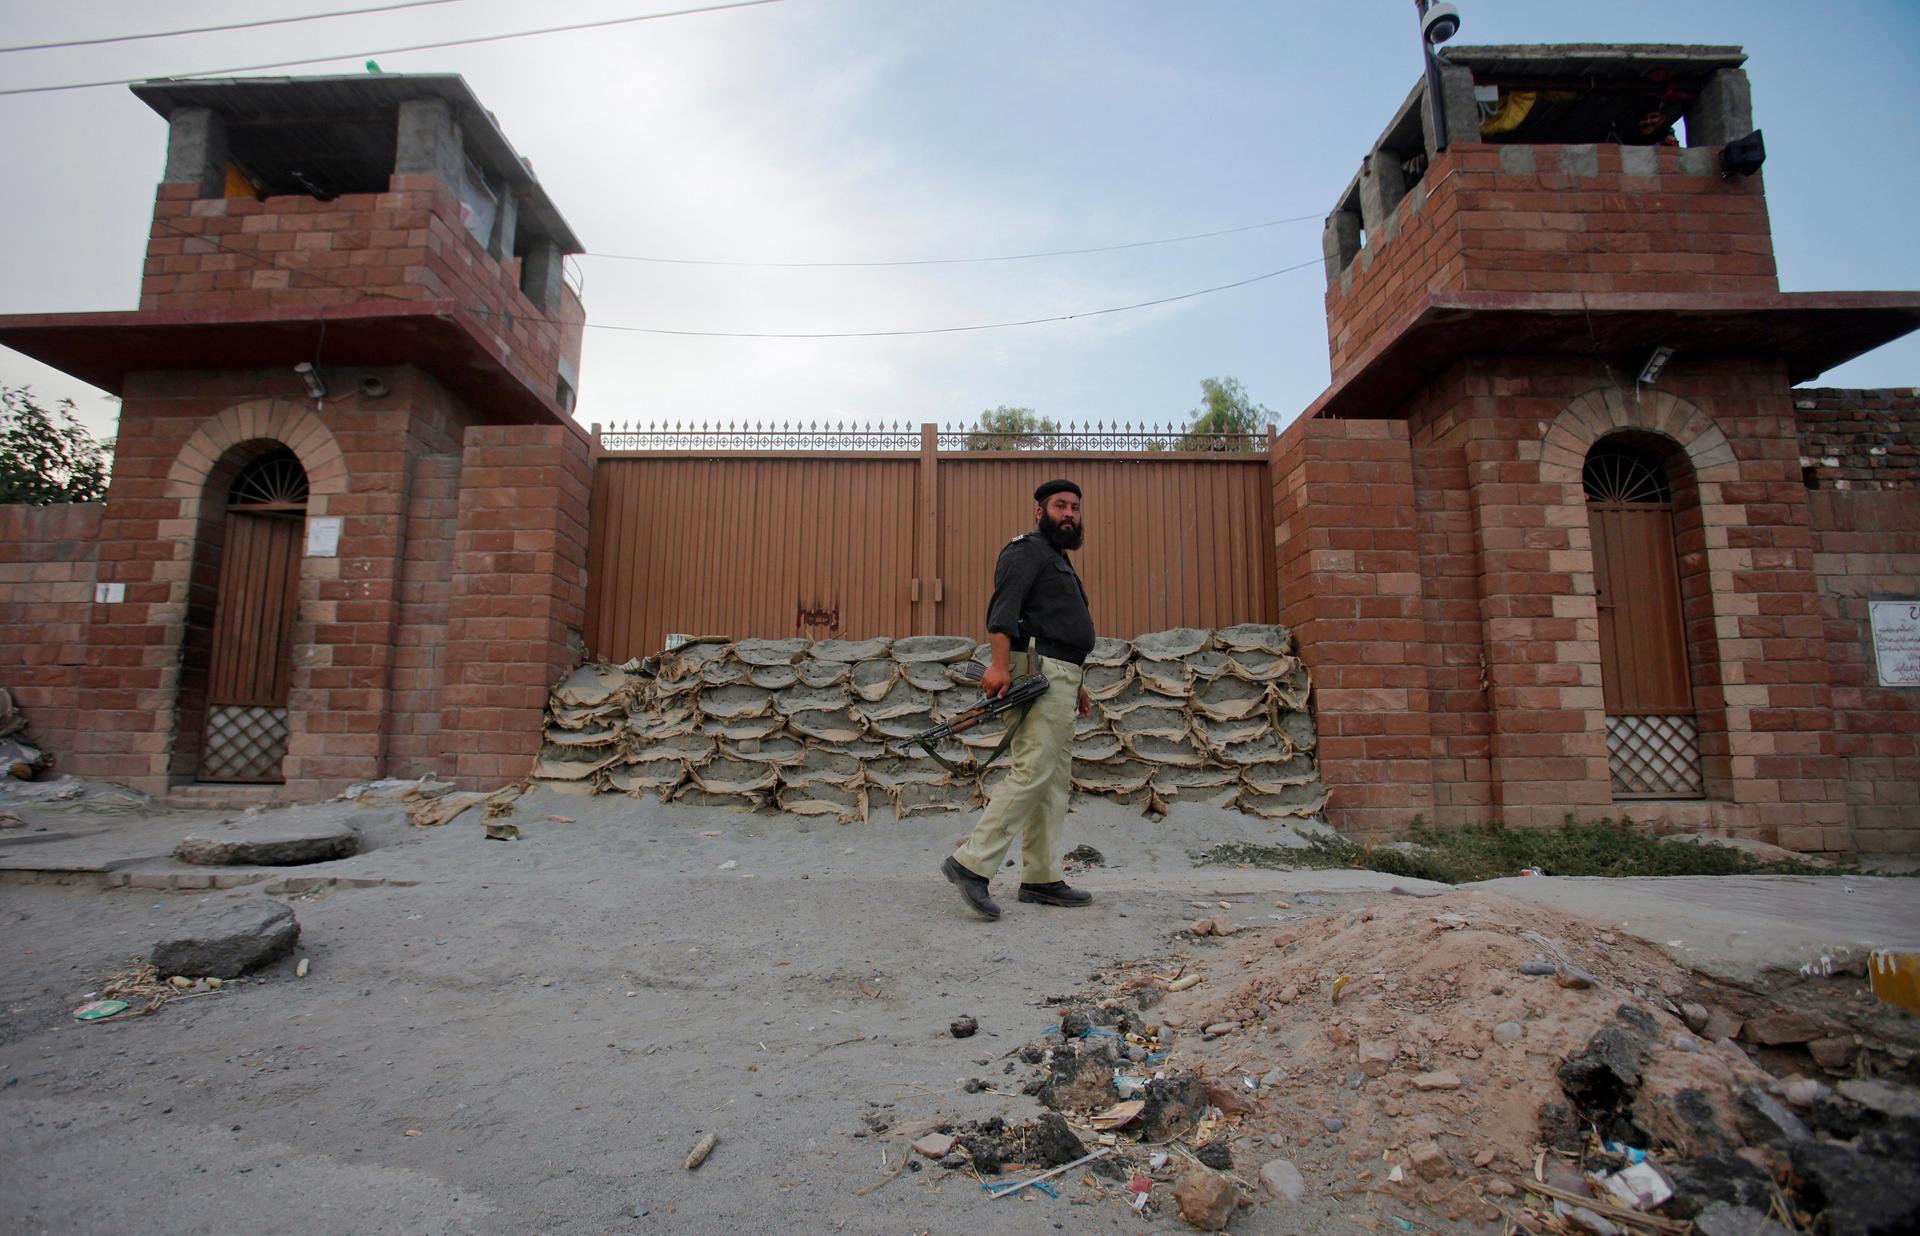 A police officer walks past Central Jail in Peshawar where Pakistani doctor Shakil Afridi now sits. Afridi was arrested in May 2011 for helping the CIA find Osama bin Laden.